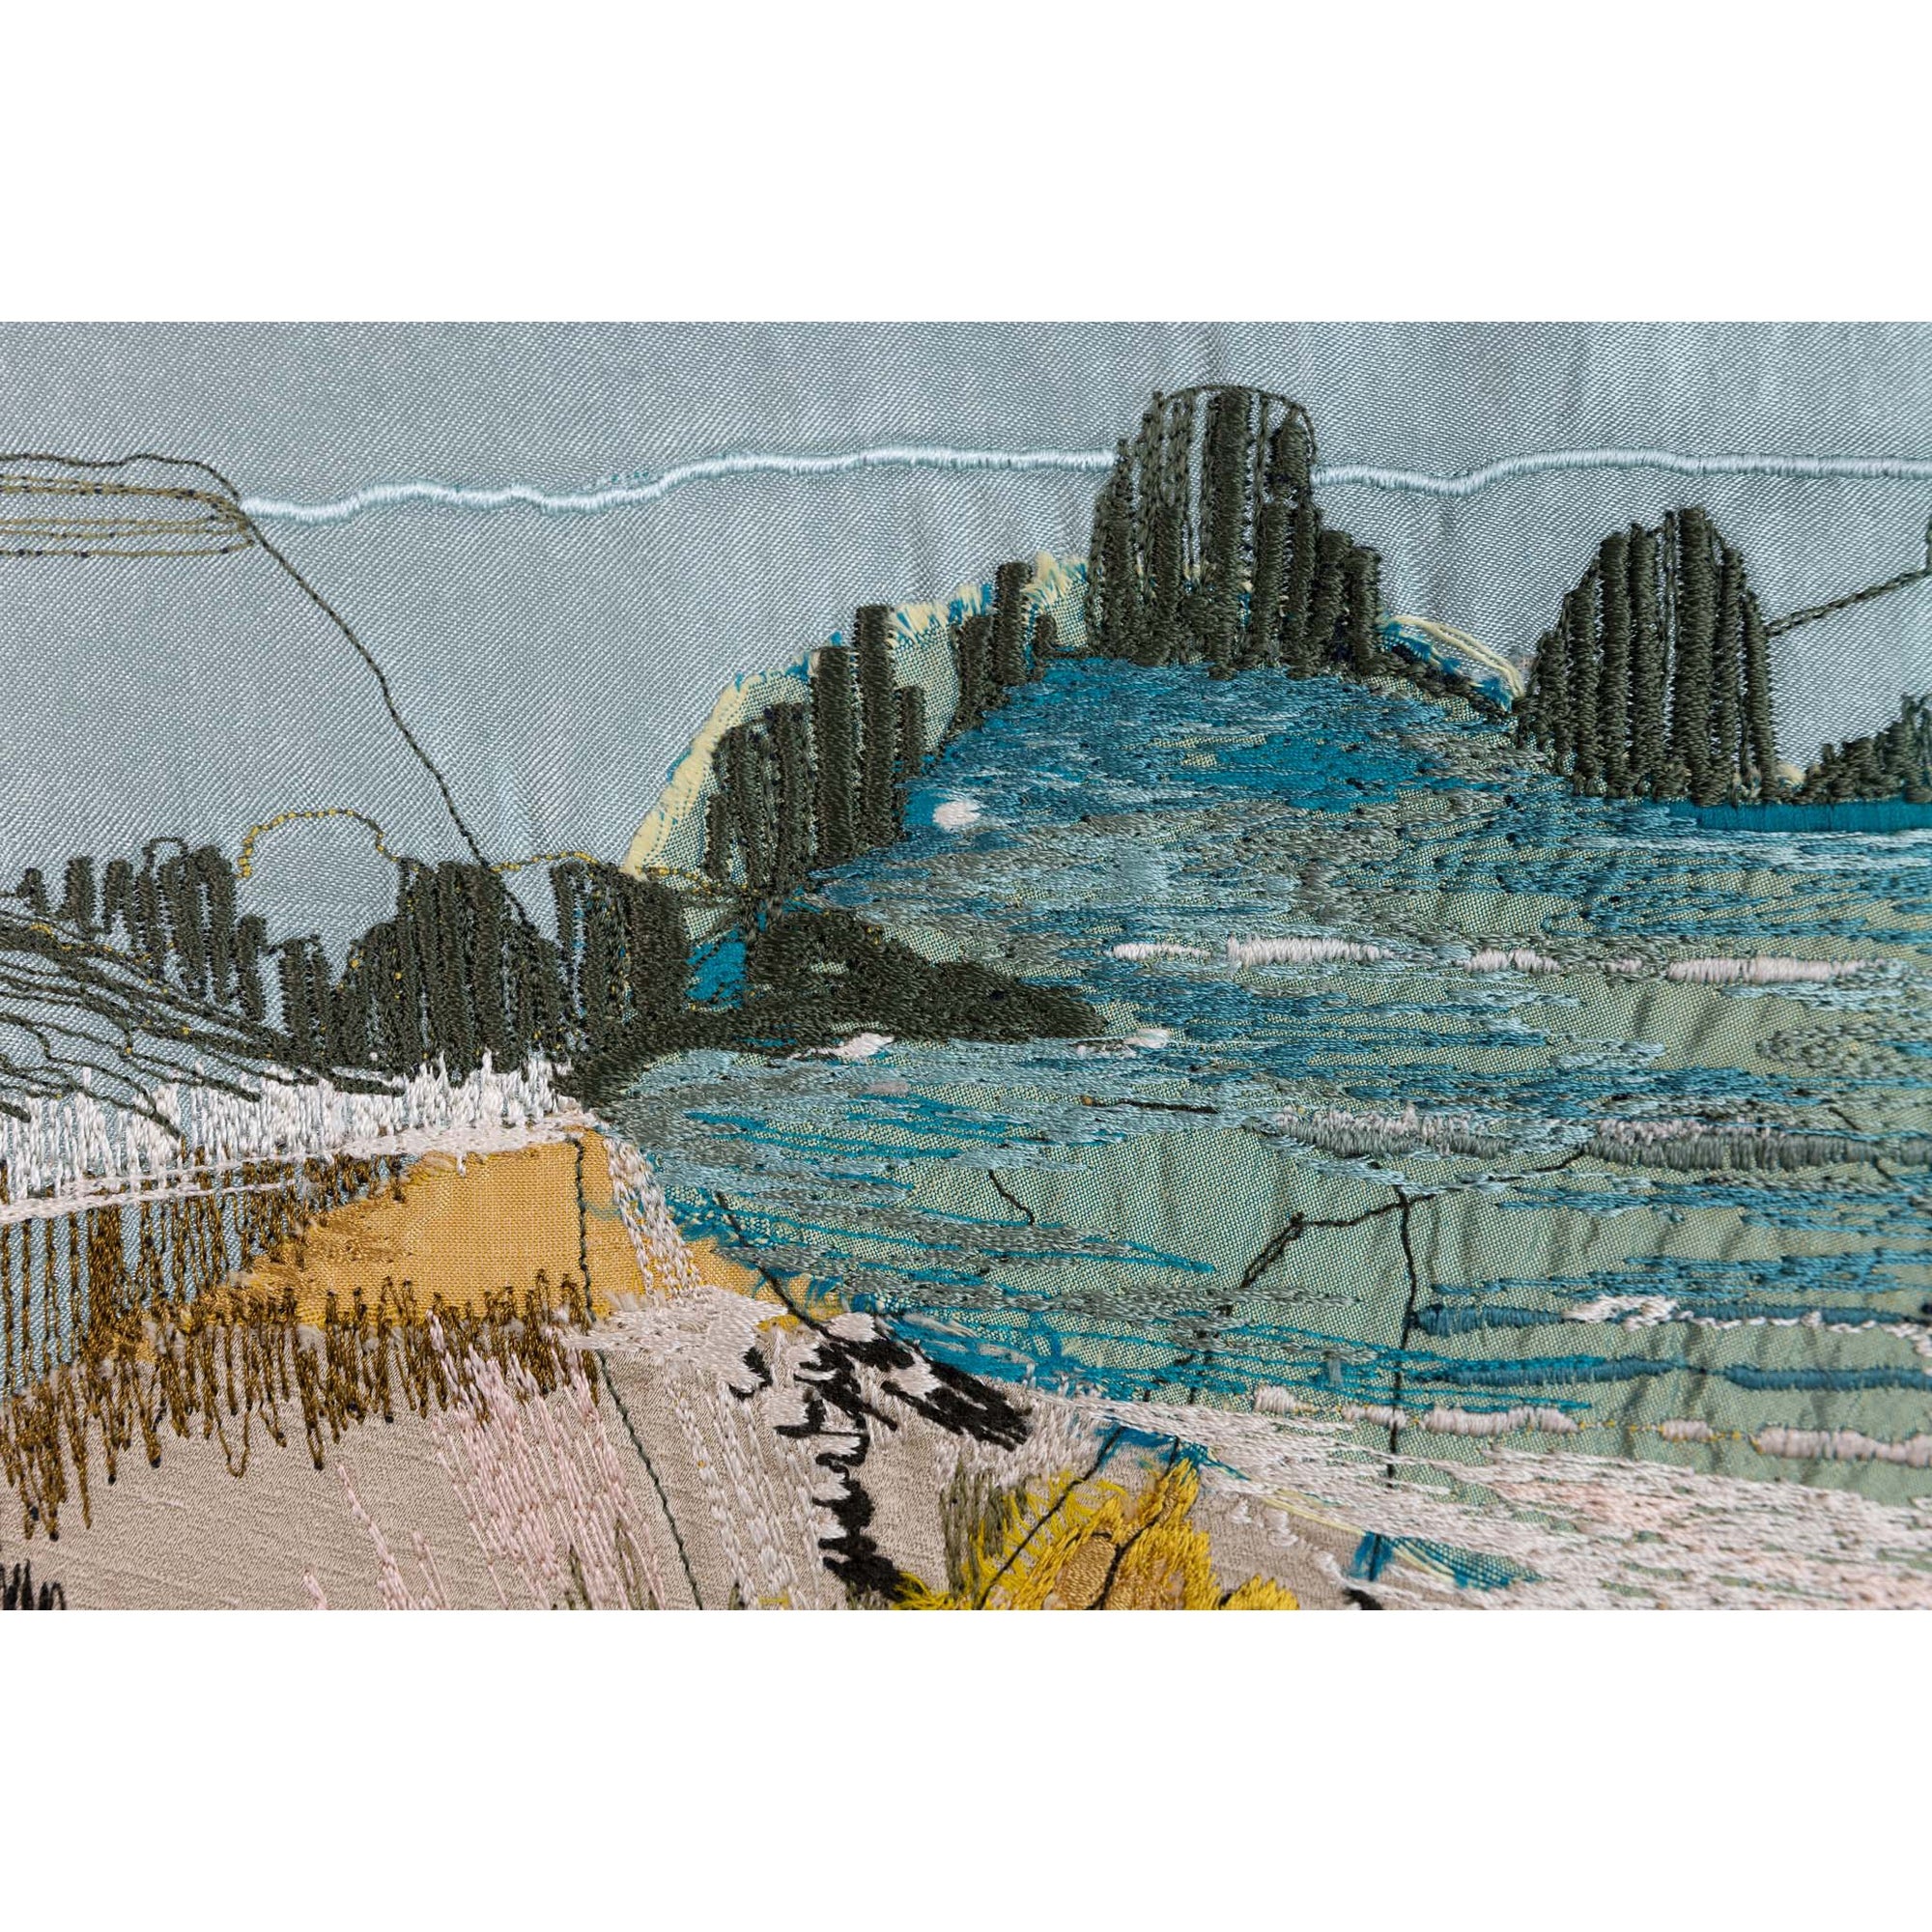 'White Sands and Lichen' dynamic stitched textiles by Sarah Pooley, available at Padstow Gallery, Cornwall